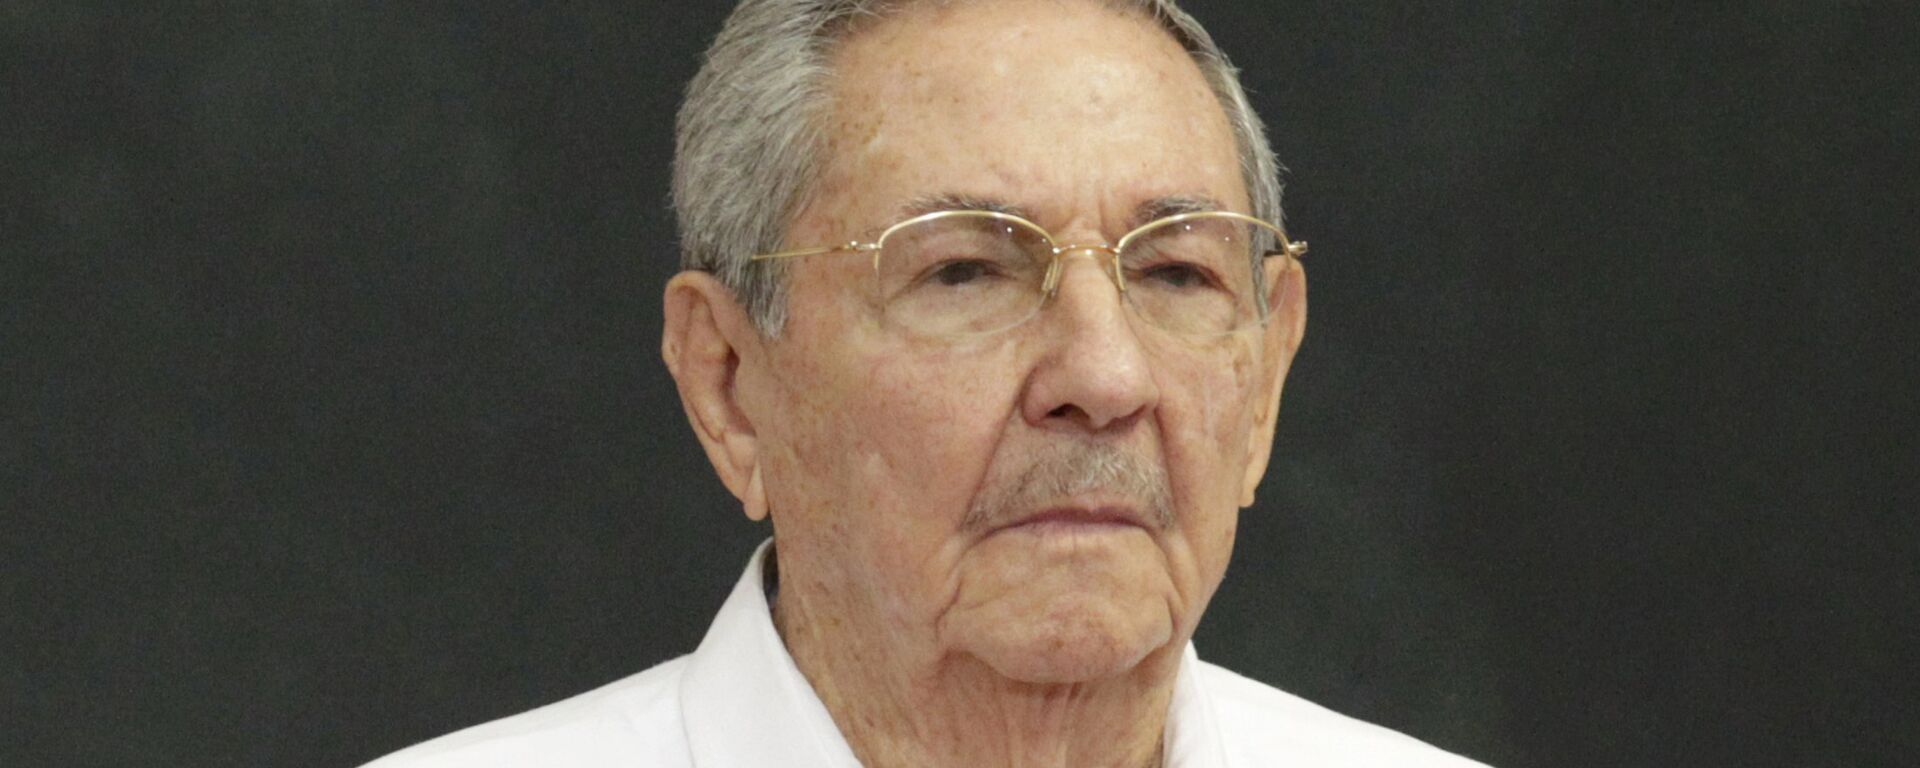 Cuba's President Raul Castro attends an official welcoming ceremony for him, at the Yucatan State Government Palace in Merida, Mexico - Sputnik Mundo, 1920, 16.04.2021